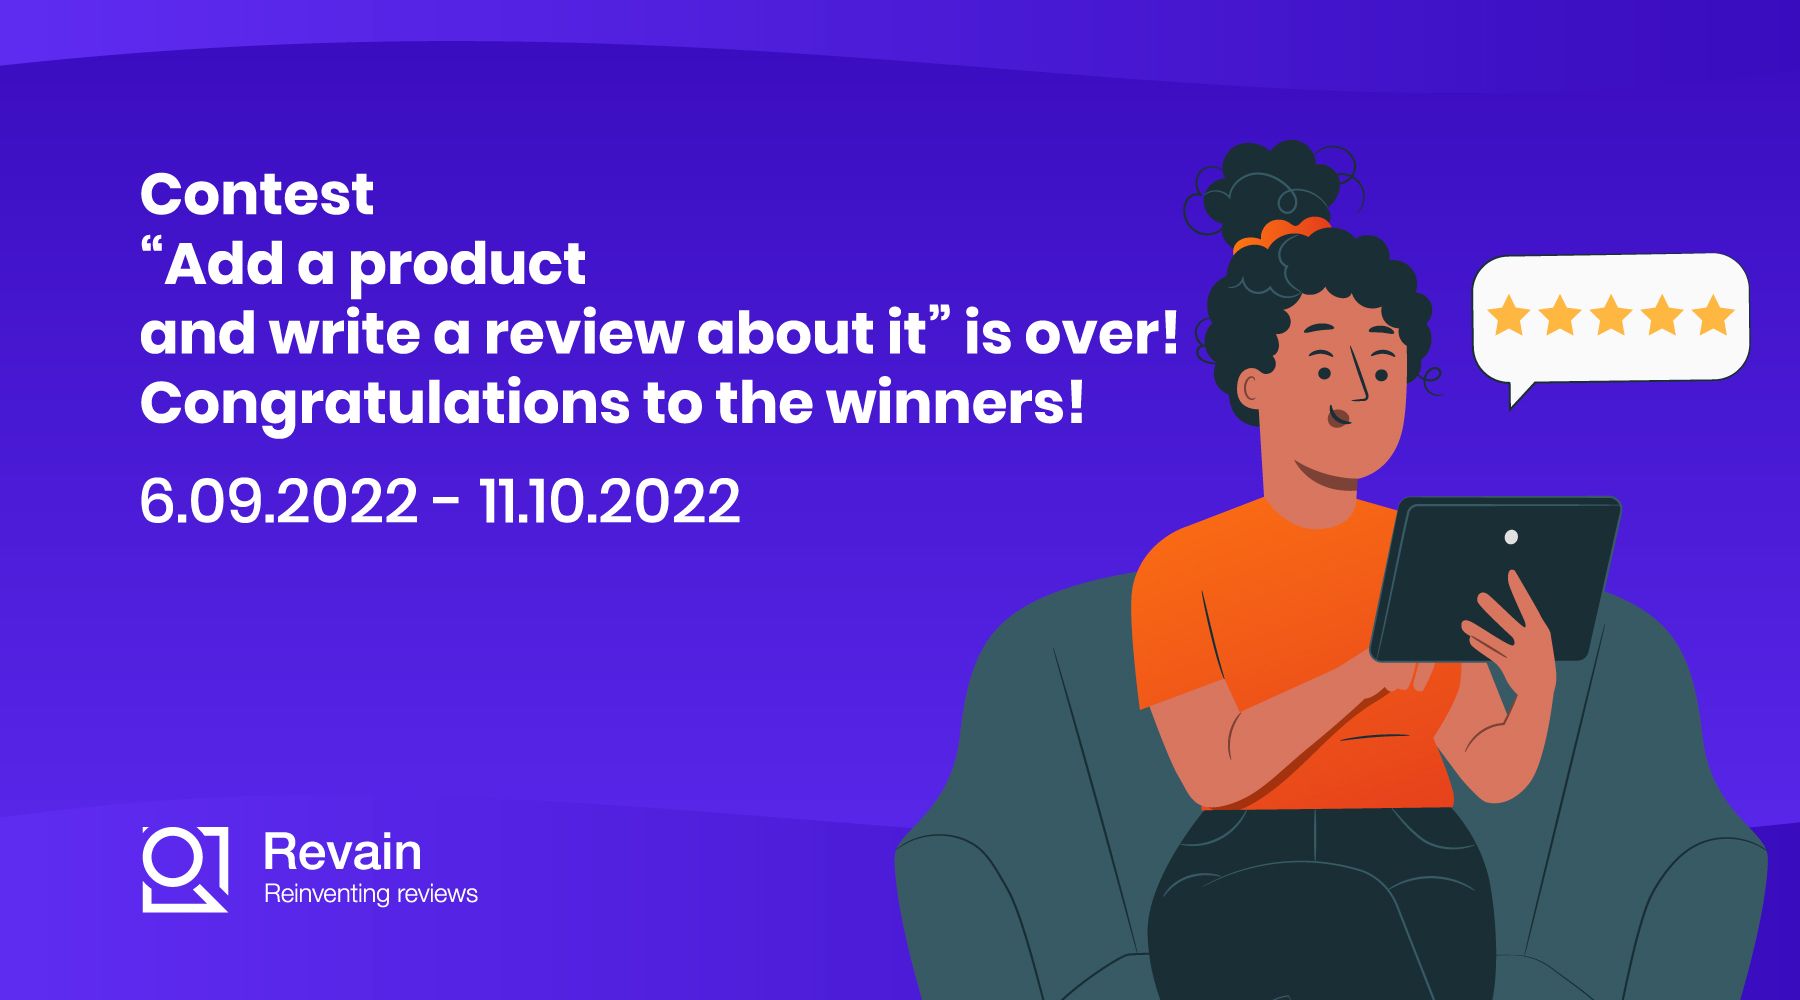 Article Сontest "Add a product and write a review about it" is over!